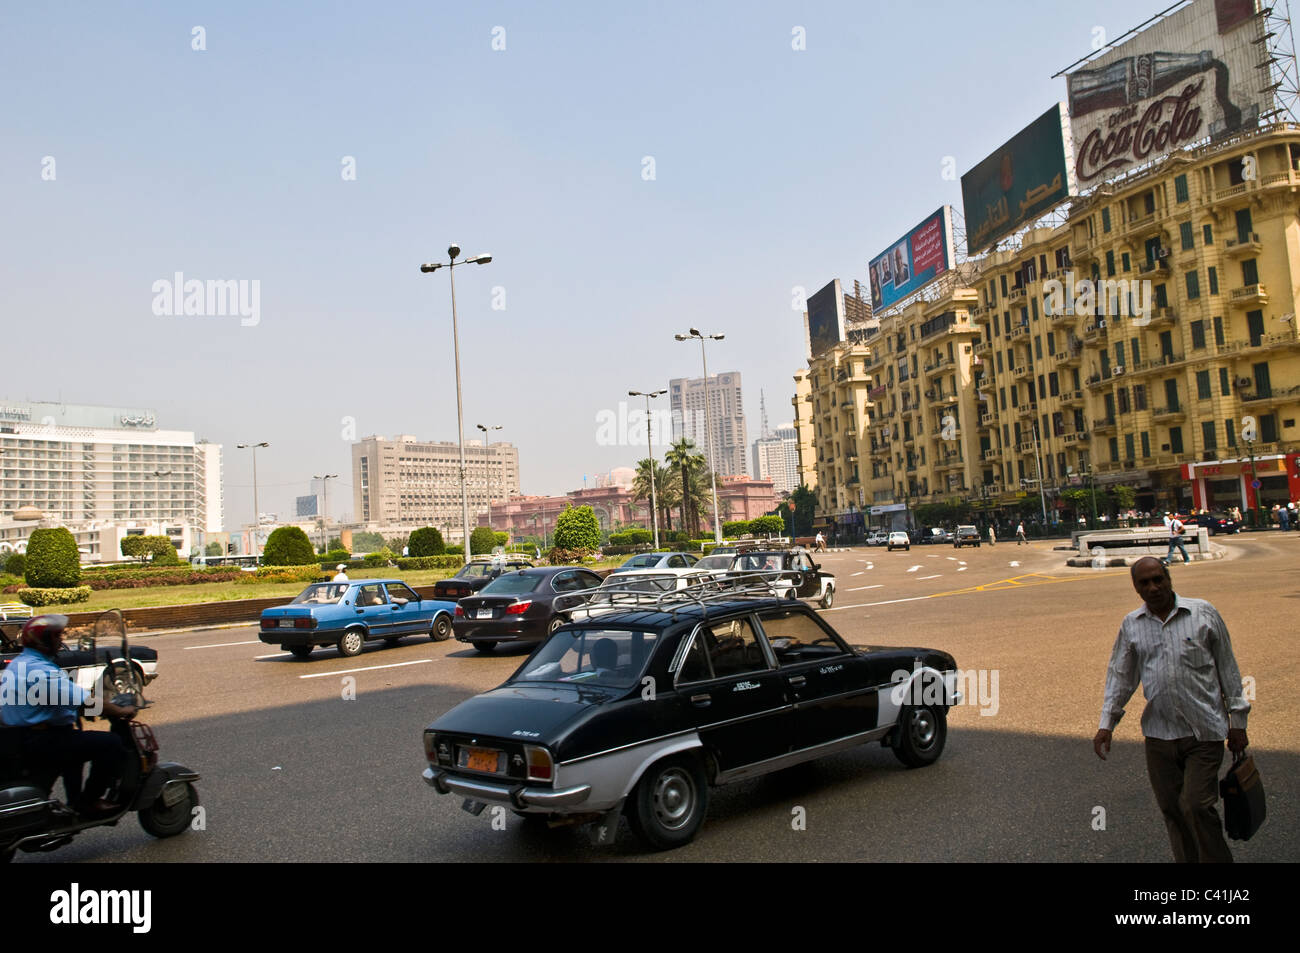 Midan (circle) Tahrir in Cairo which was the center of the protests and demonstrations in 2011. Stock Photo